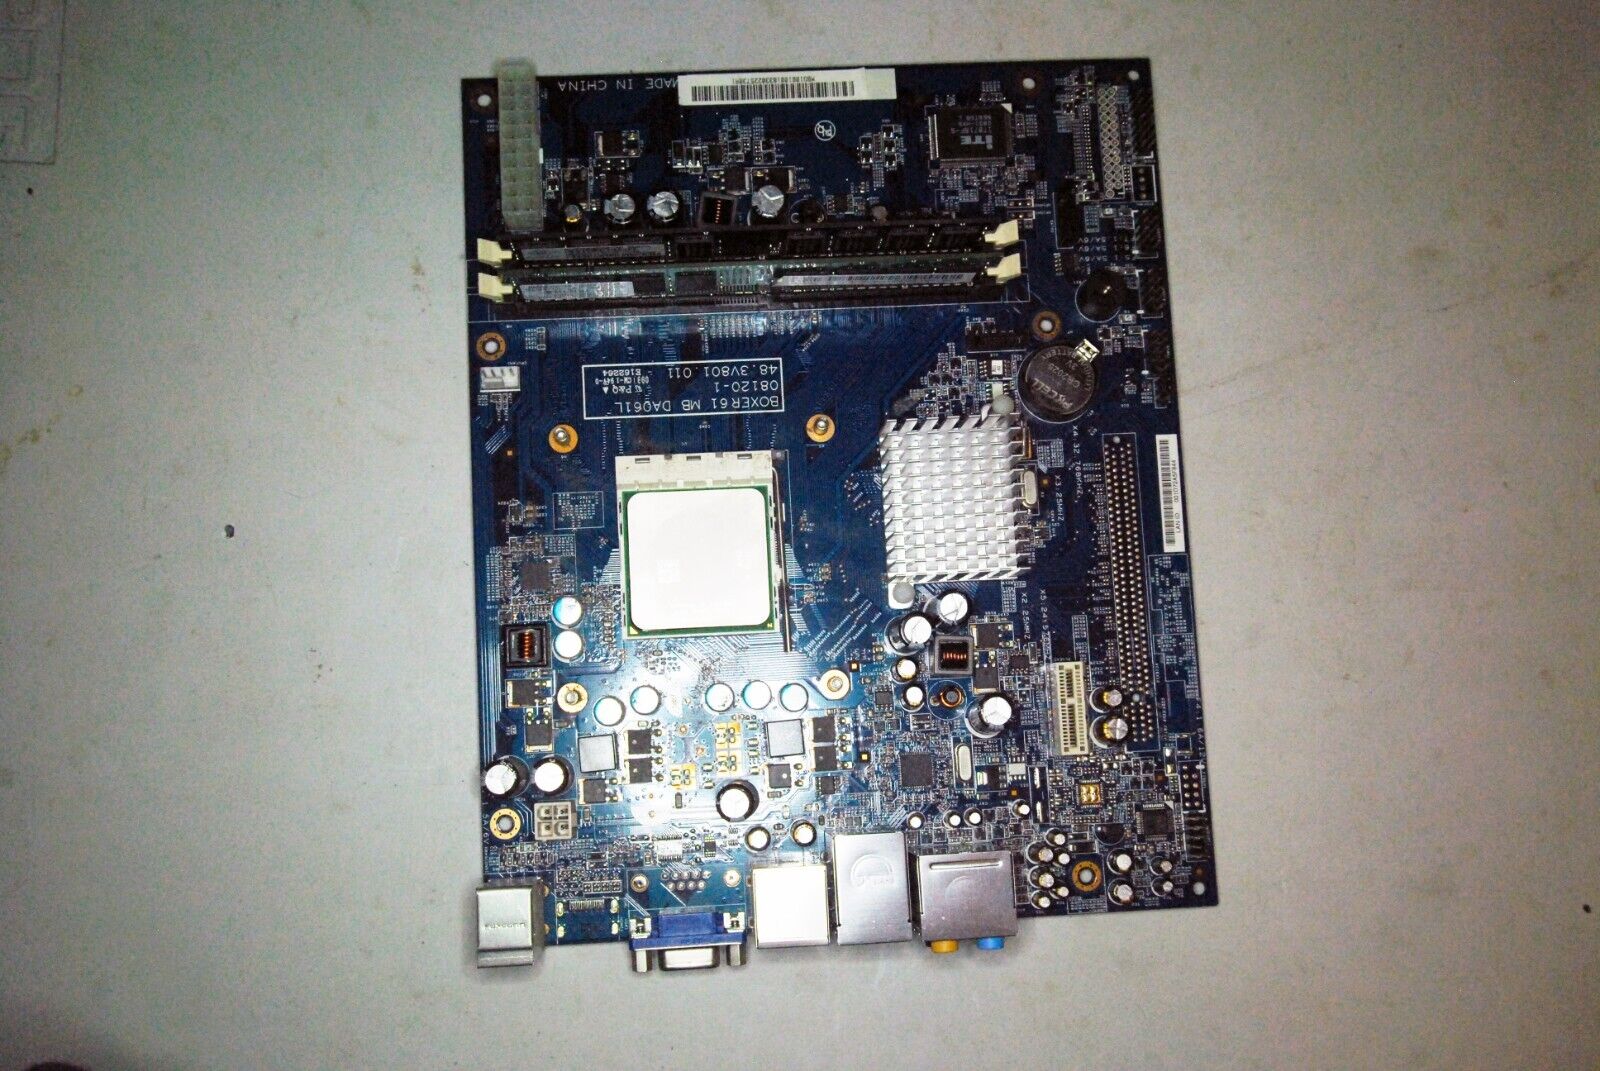 eMachines EL1200-05W Boxer61 DA061L mobo with AMD Athlon CPU and 2Gb ram  $TRP